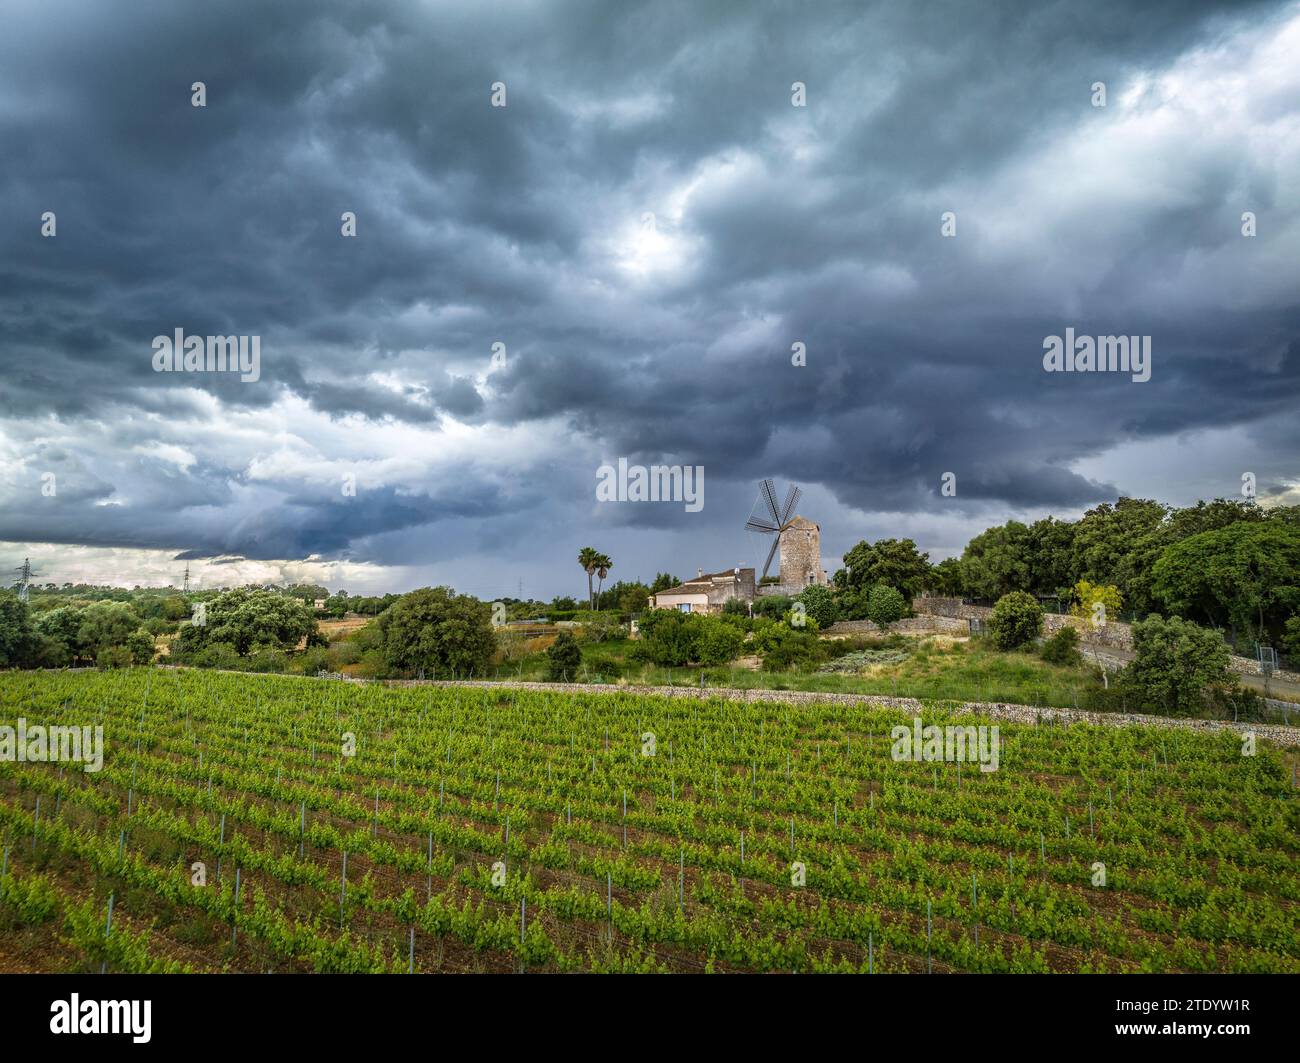 Vineyards behind the Molí d'en Blanc windmill, in Llubí, on a spring afternoon with storm clouds (Mallorca, Balearic Islands, Spain) Stock Photo